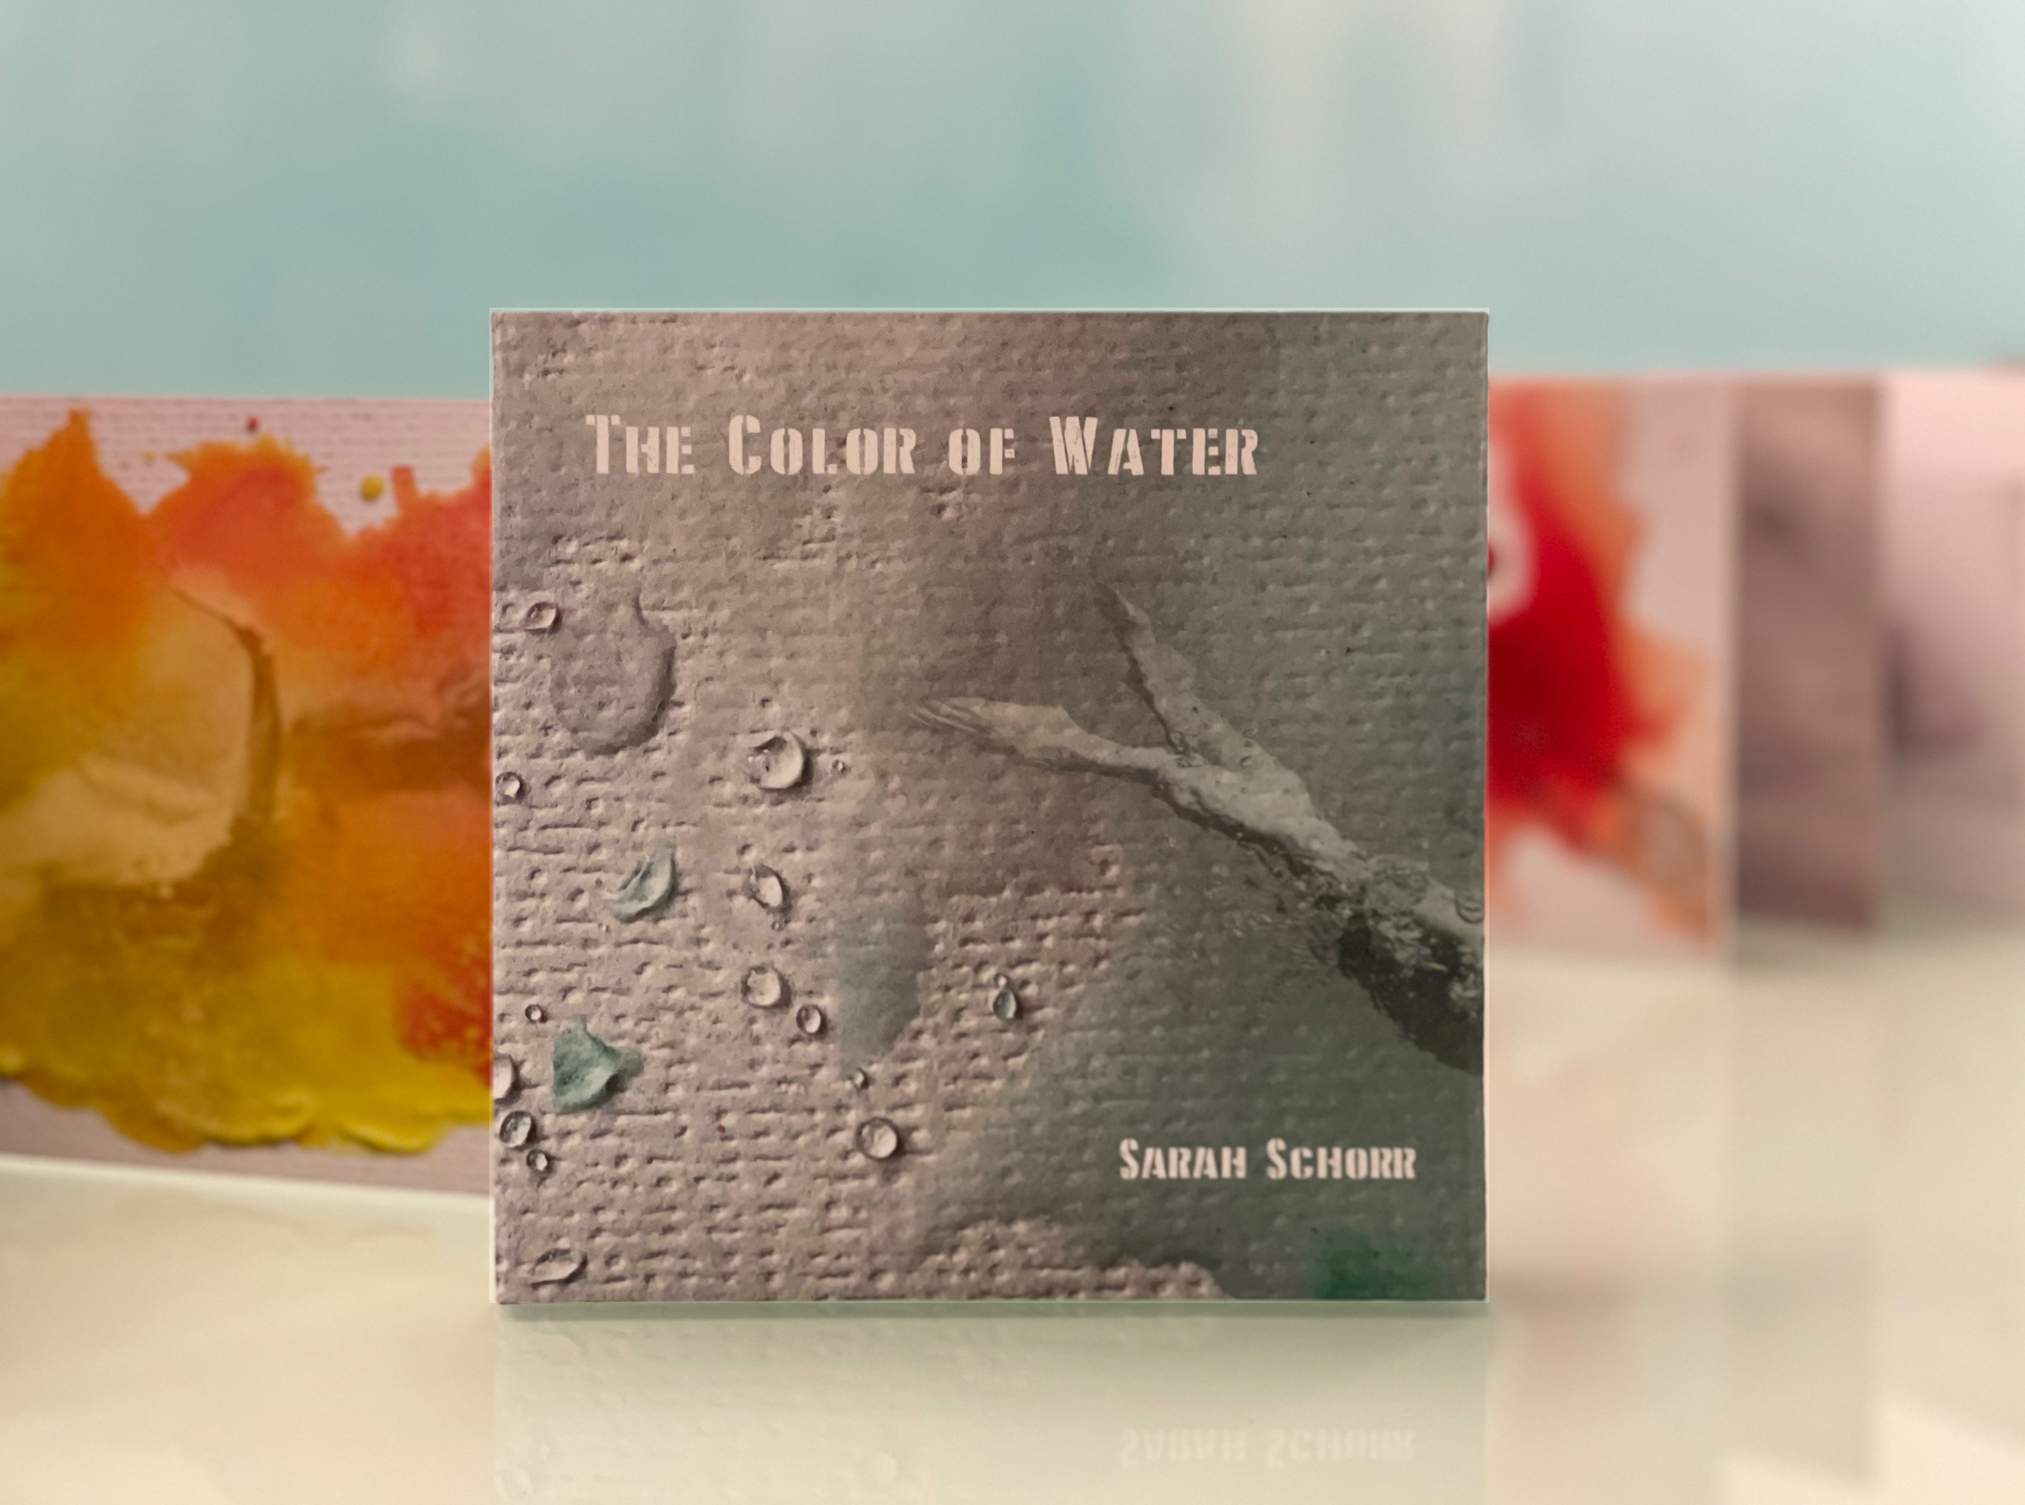 Art Publication: The Color of Water by Sarah Schorr